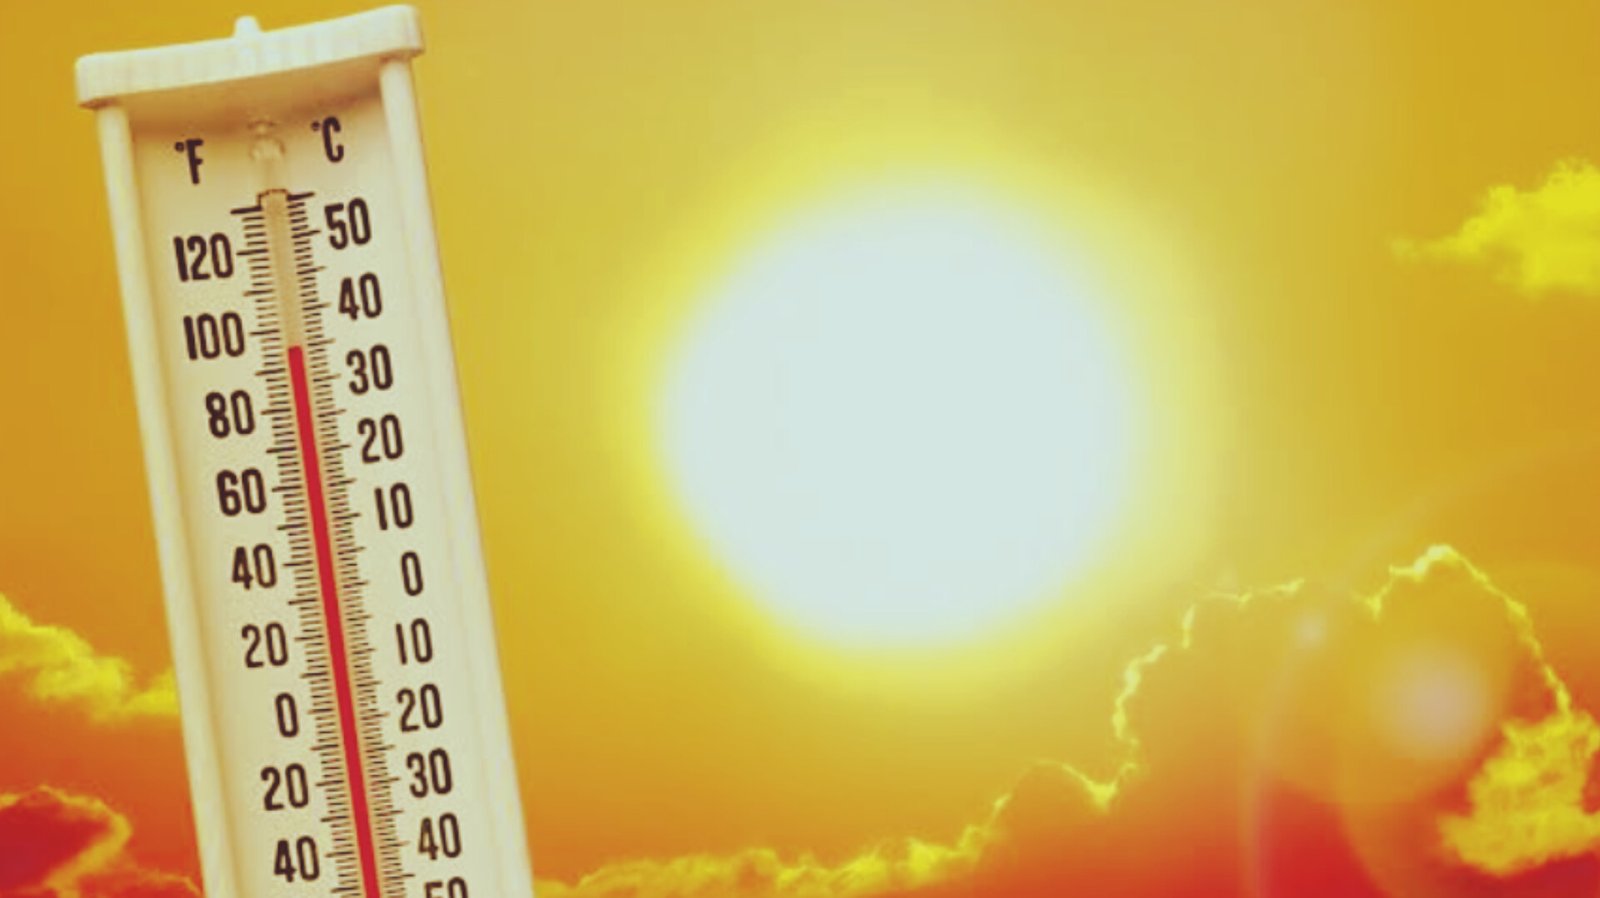 Odisha sizzles as temperature soars above 40°C in several places